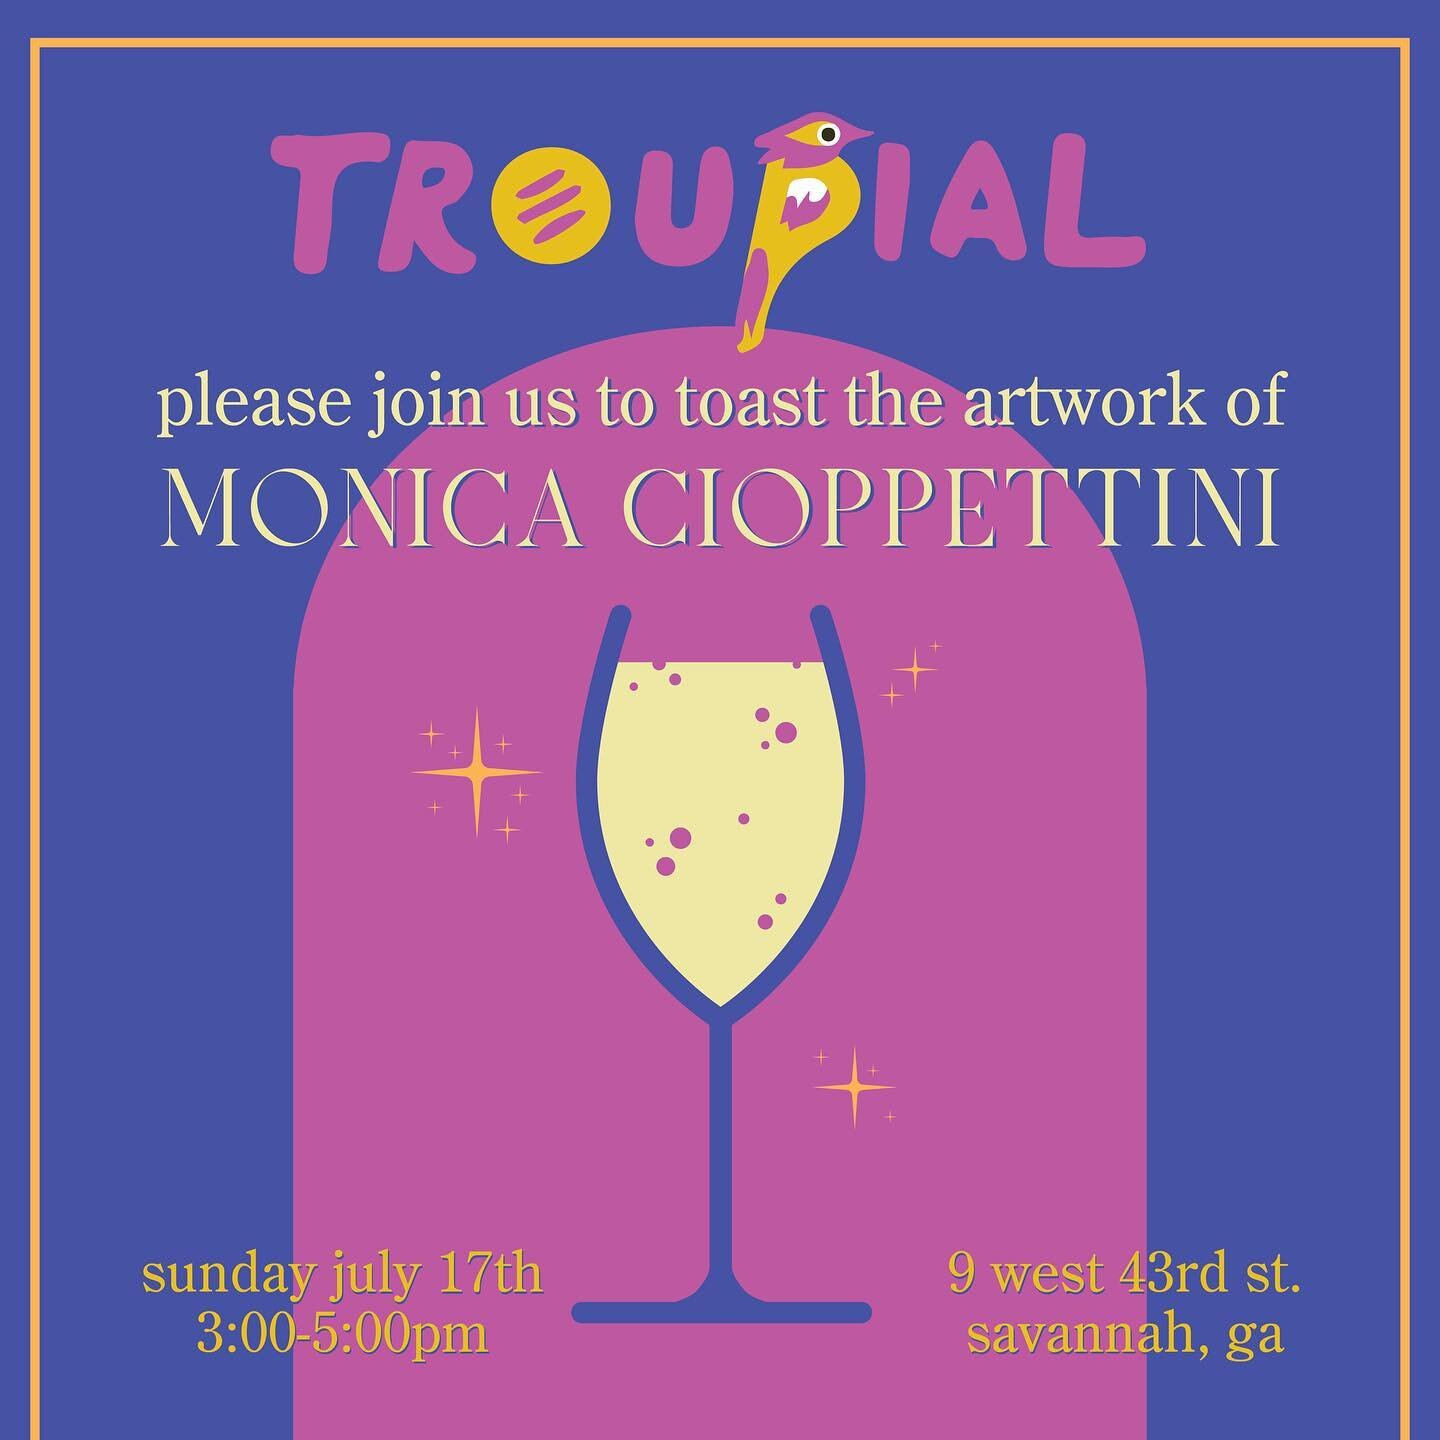 Come join us this Sunday @troupialsav! This will be the last week too see and purchase my artwork at the coffee shop and we&rsquo;d like to celebrate with Venezuelan cuisine and mimosas! 🥂A big thank you to @troupialsav for displaying my artwork and